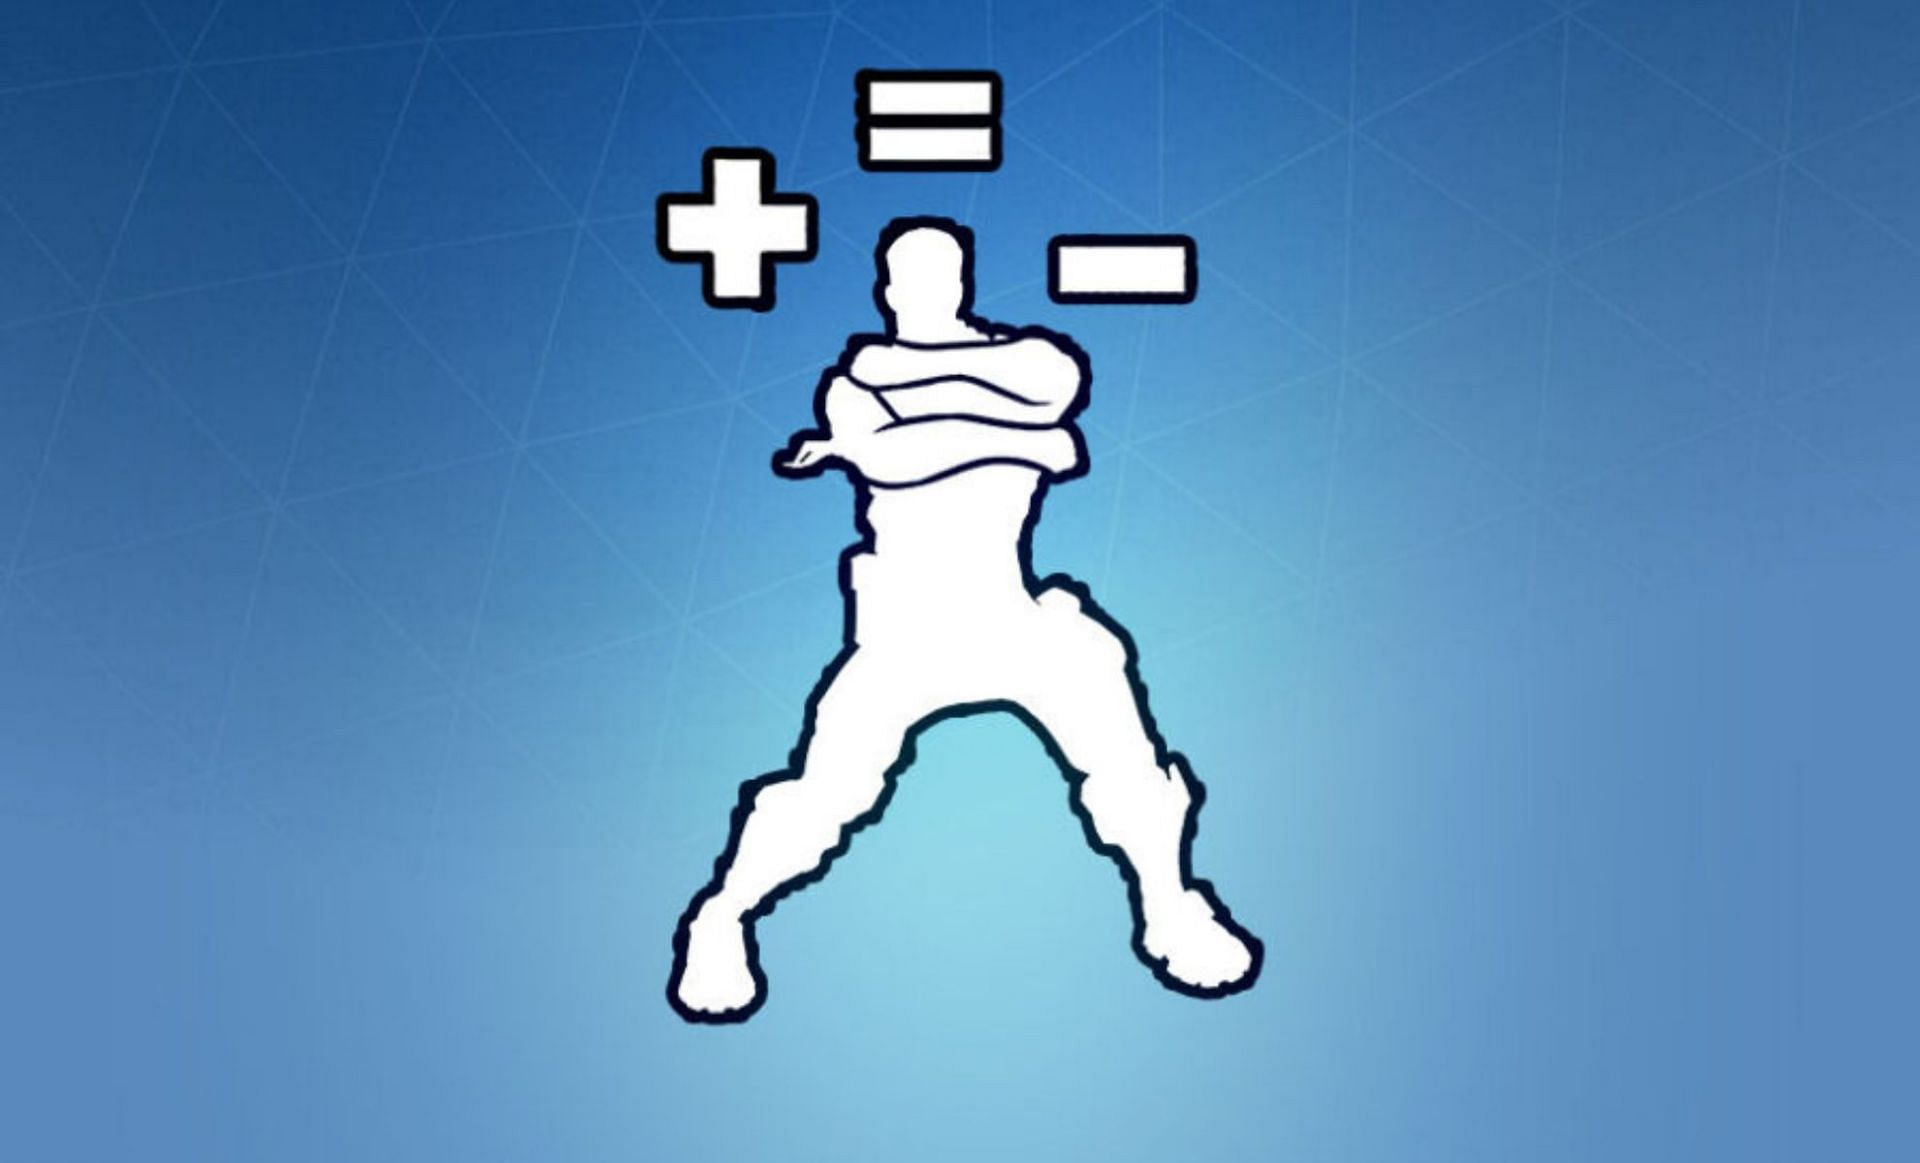 Tones and I hit song 'Dance Monkey' to become a Fortnite Icon Series emote